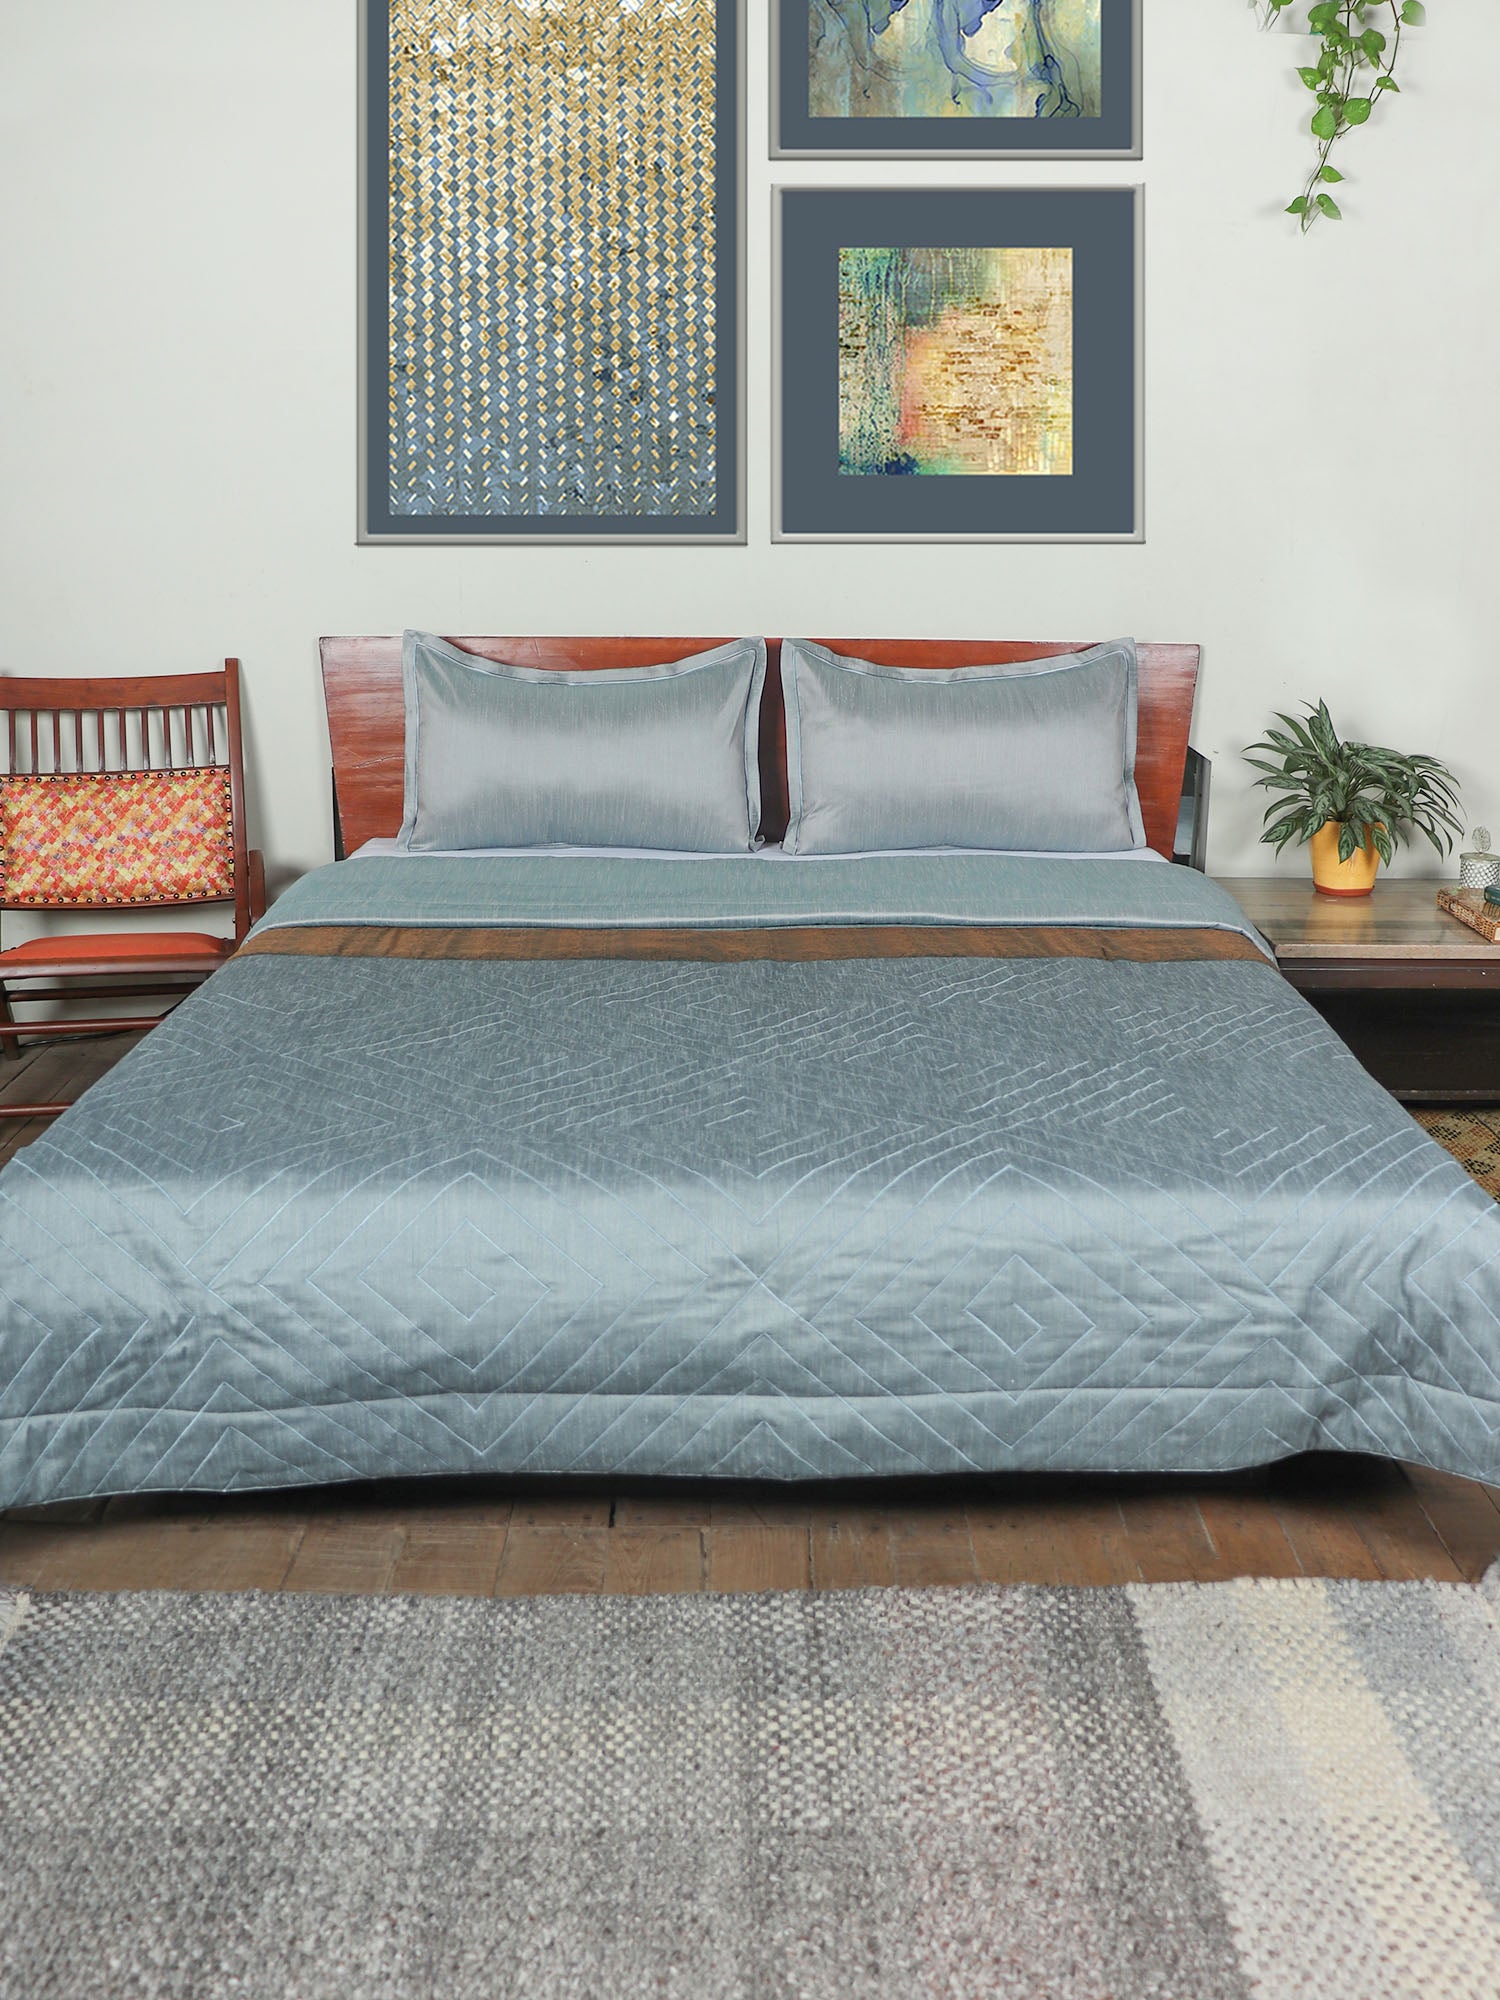 Quilt for Double Bed Kingsize | Patchwork with Machine Embroidery and Self Quilting lines| AC Comfortor/Blanket/Duvet | Polyblend with Brocade Silk - Blue | 90x108+17x27 inches (228x274 cm)